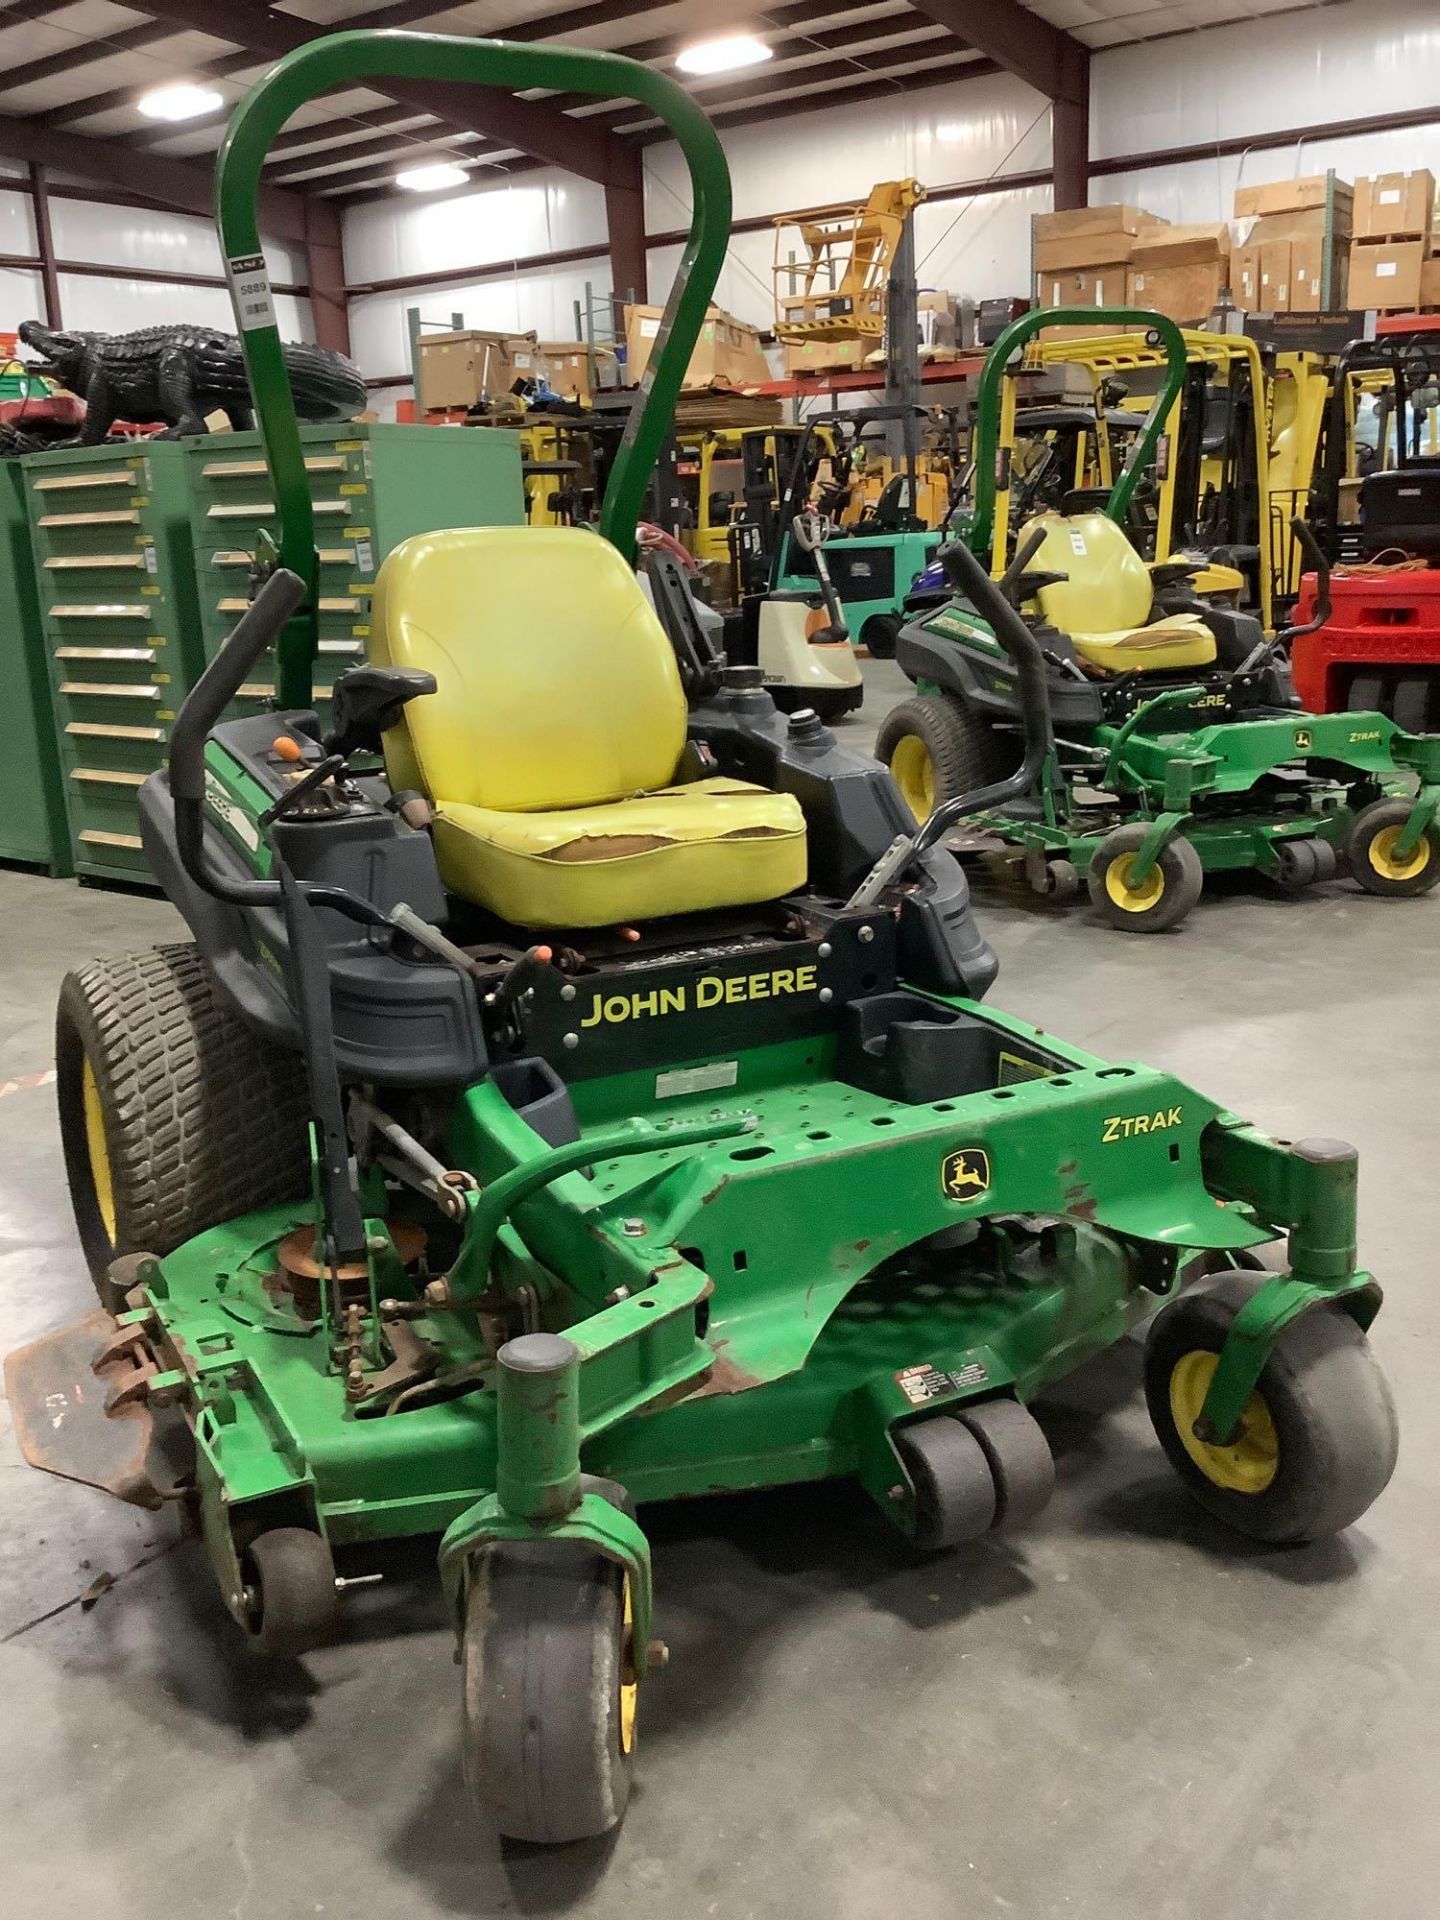 2016 JOHN DEERE COMMERCIAL MOWER MODEL Z950M APPROX 60IN ,GAS POWER, RUNS AND OPERATES